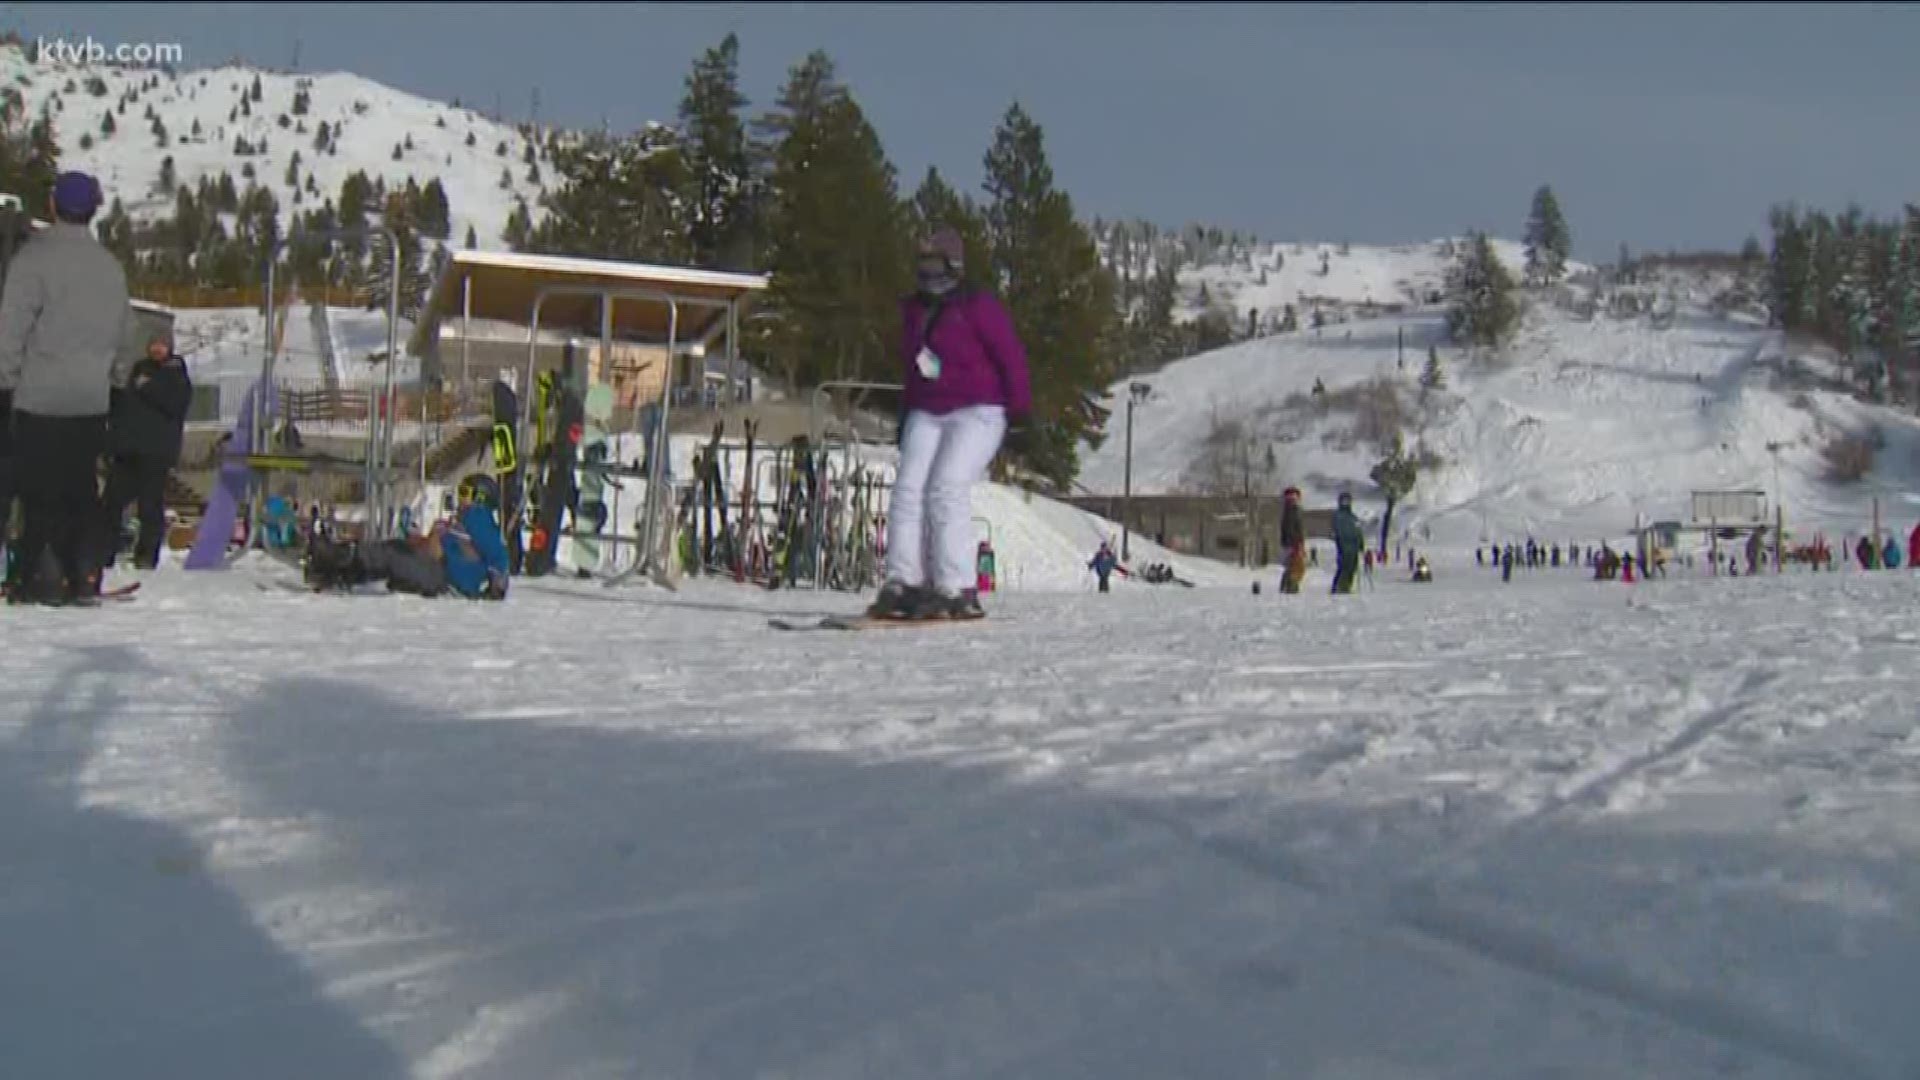 Some resorts are increasing pay and perks to attract seasonal workers.